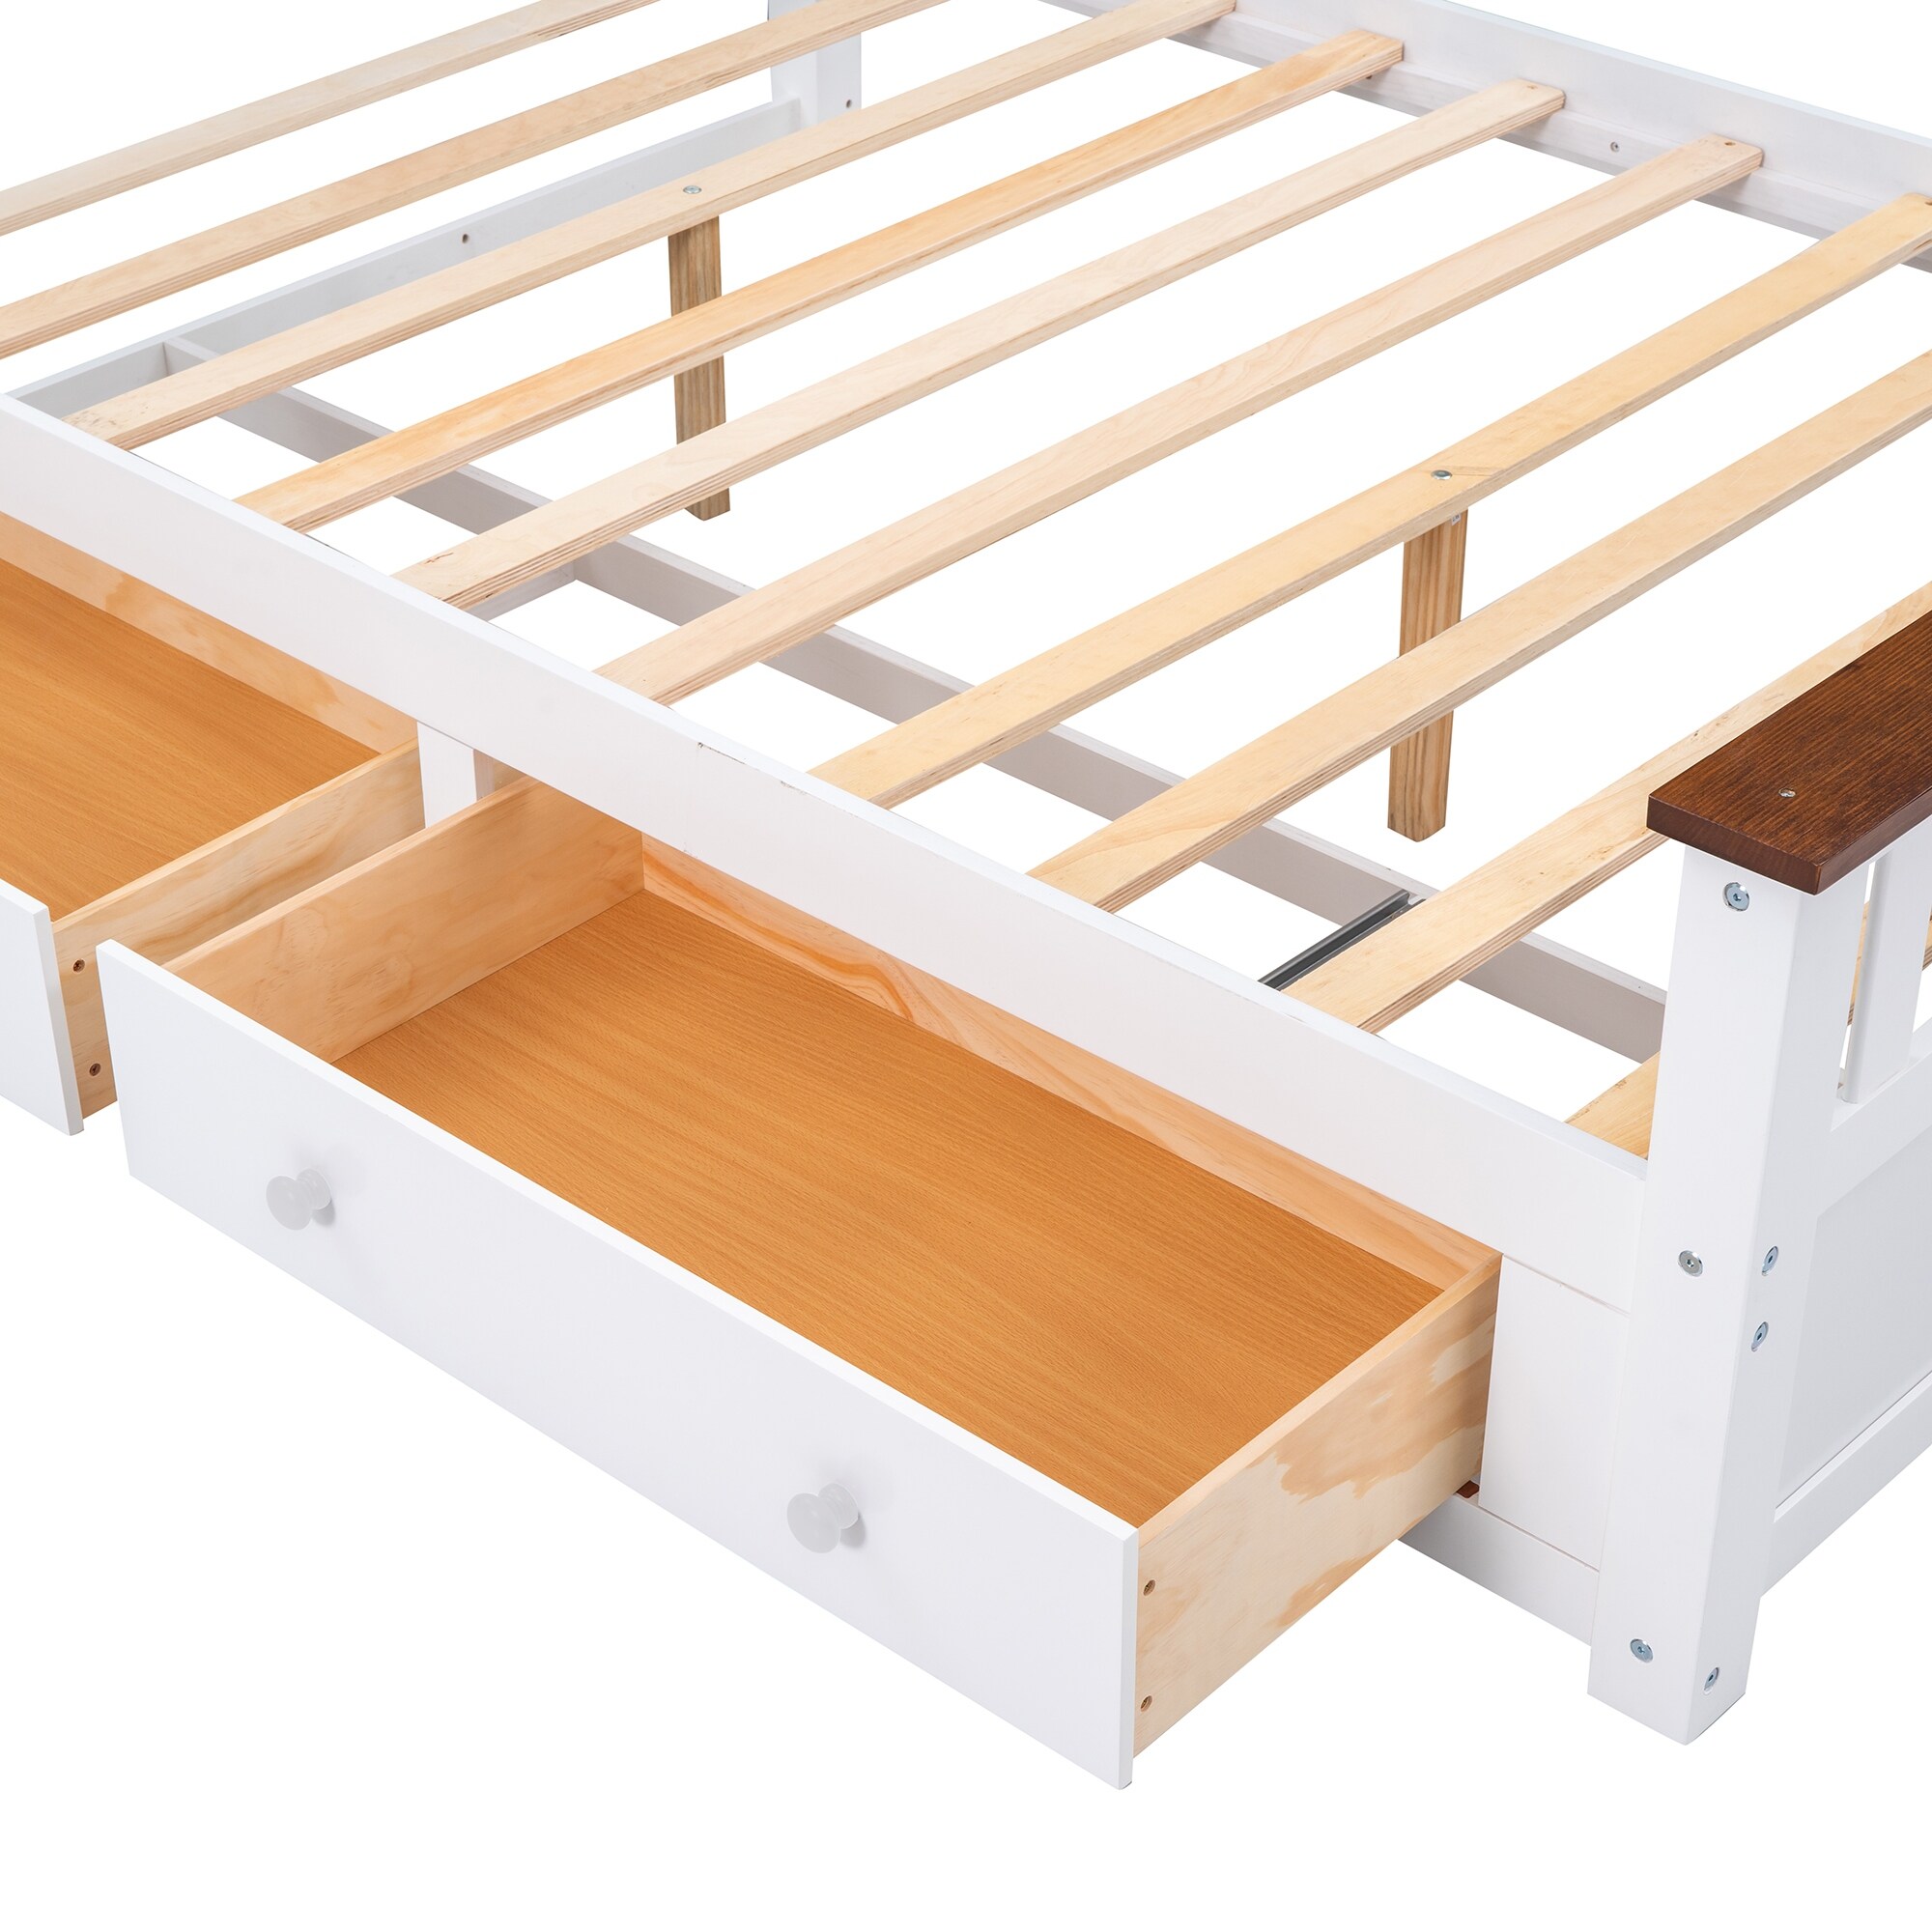 Full Classic Design Platform Bed with 2 Drawers & Wooden Slat Support, Space Saving Wood Bed Frame with Headboard & Footboard